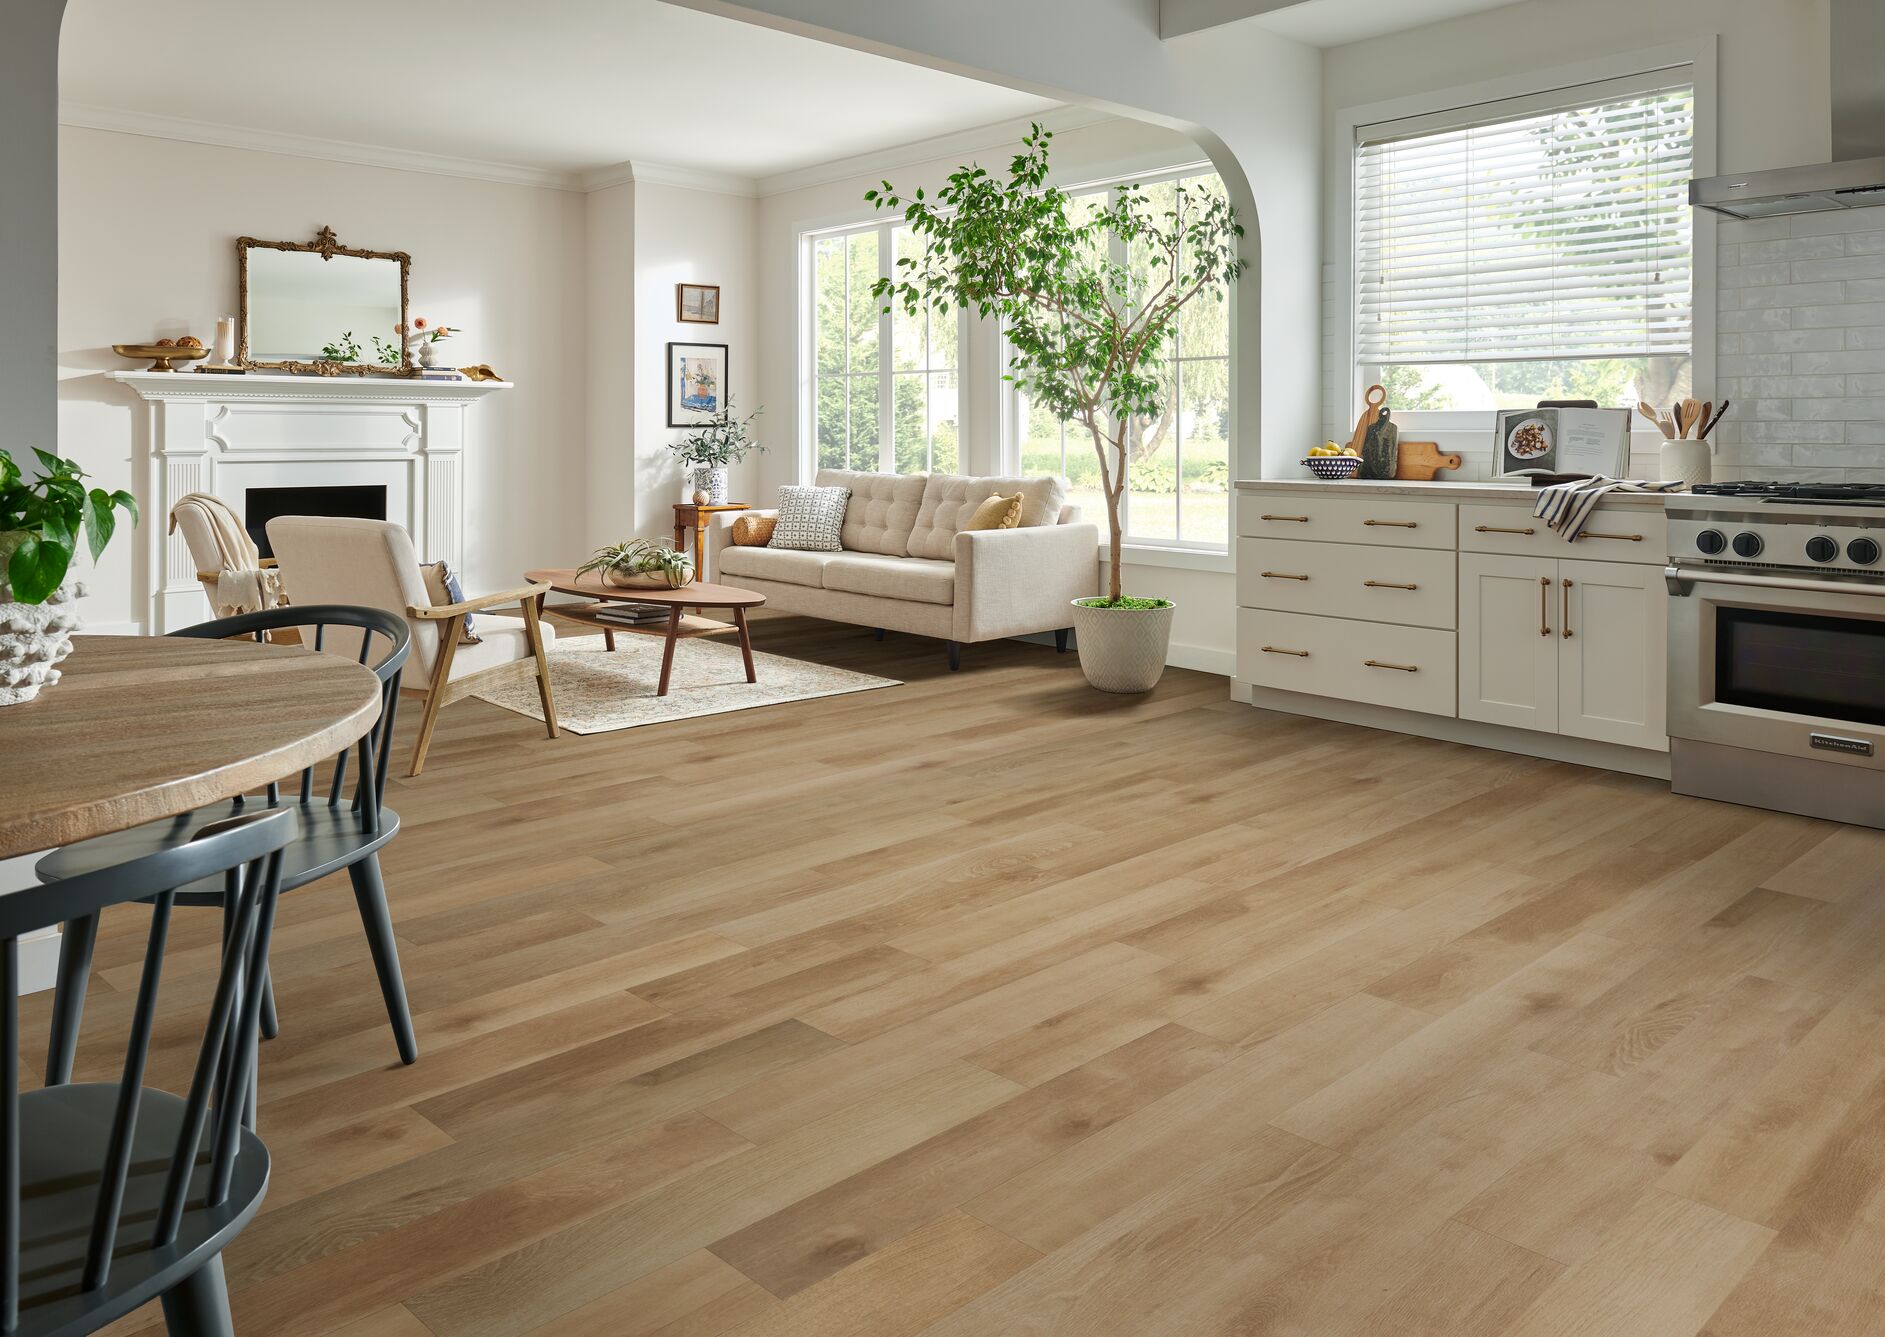 Get new luxury vinyl flooring in your home. Fill out David Tiftickjian & Sons no obligation Luxury Vinyl Inquiry Form to lock in your FREE in-home estimate.